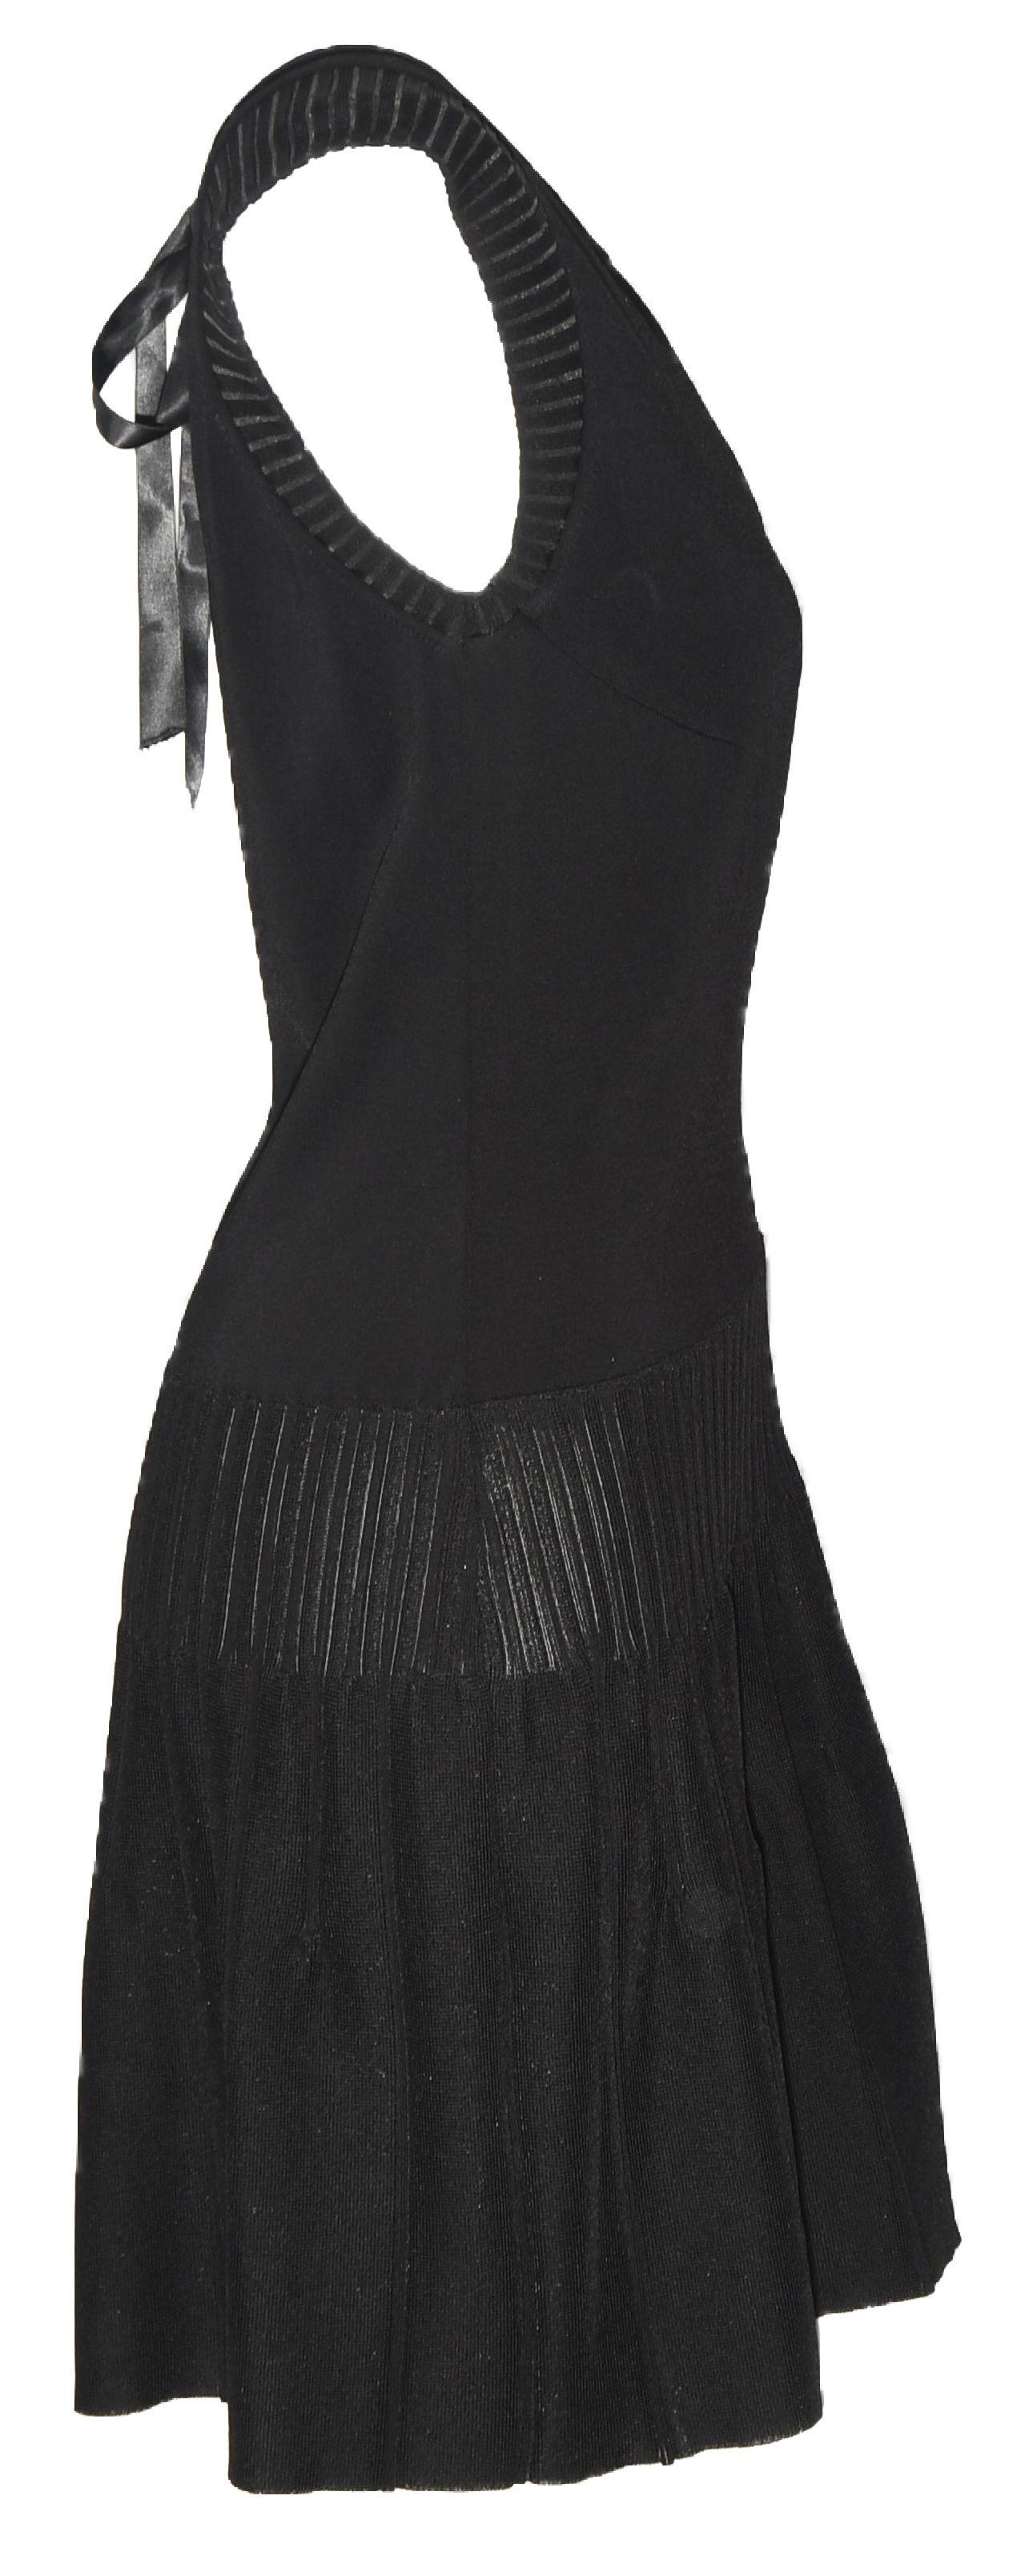 Chanel Black Sleeveless Dress with Peek a Boo V Back 46 In Excellent Condition For Sale In Palm Beach, FL